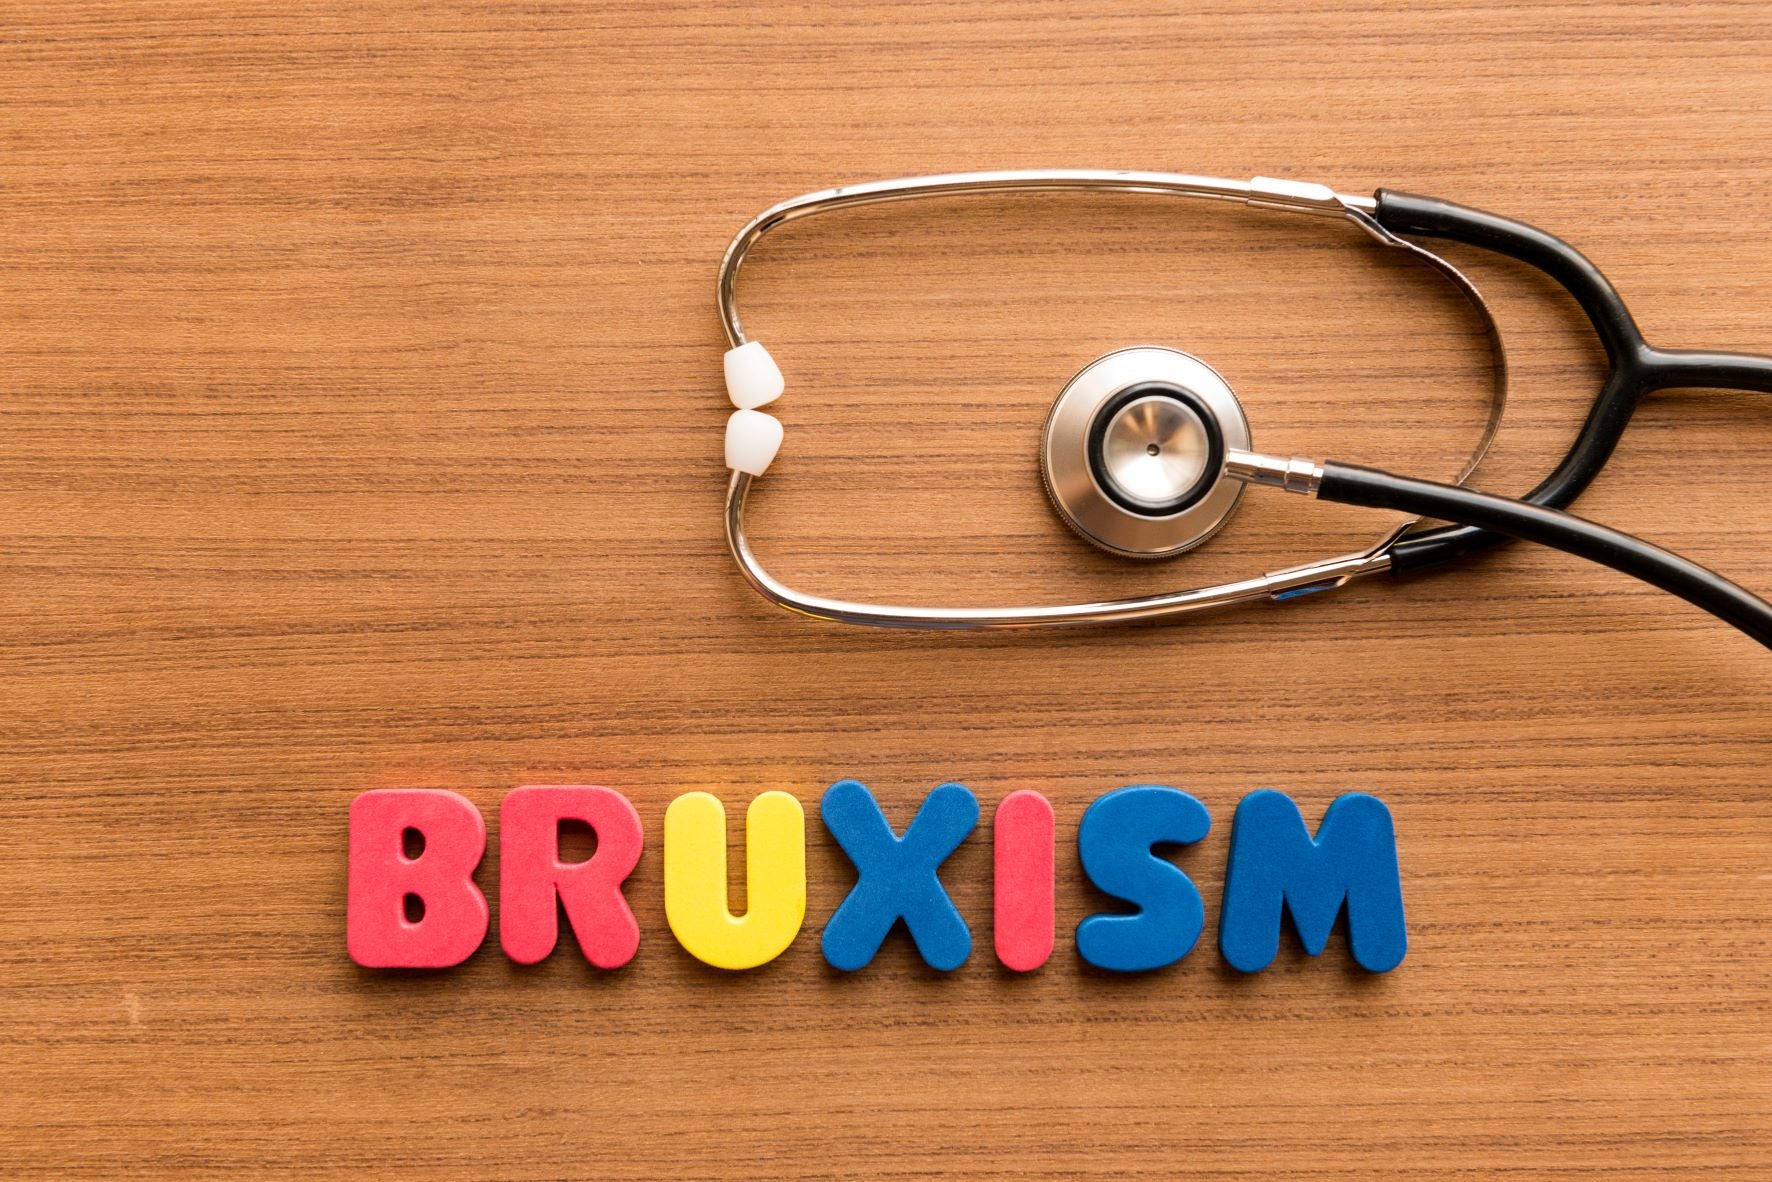 Bruxism and the effects of teeth grinding